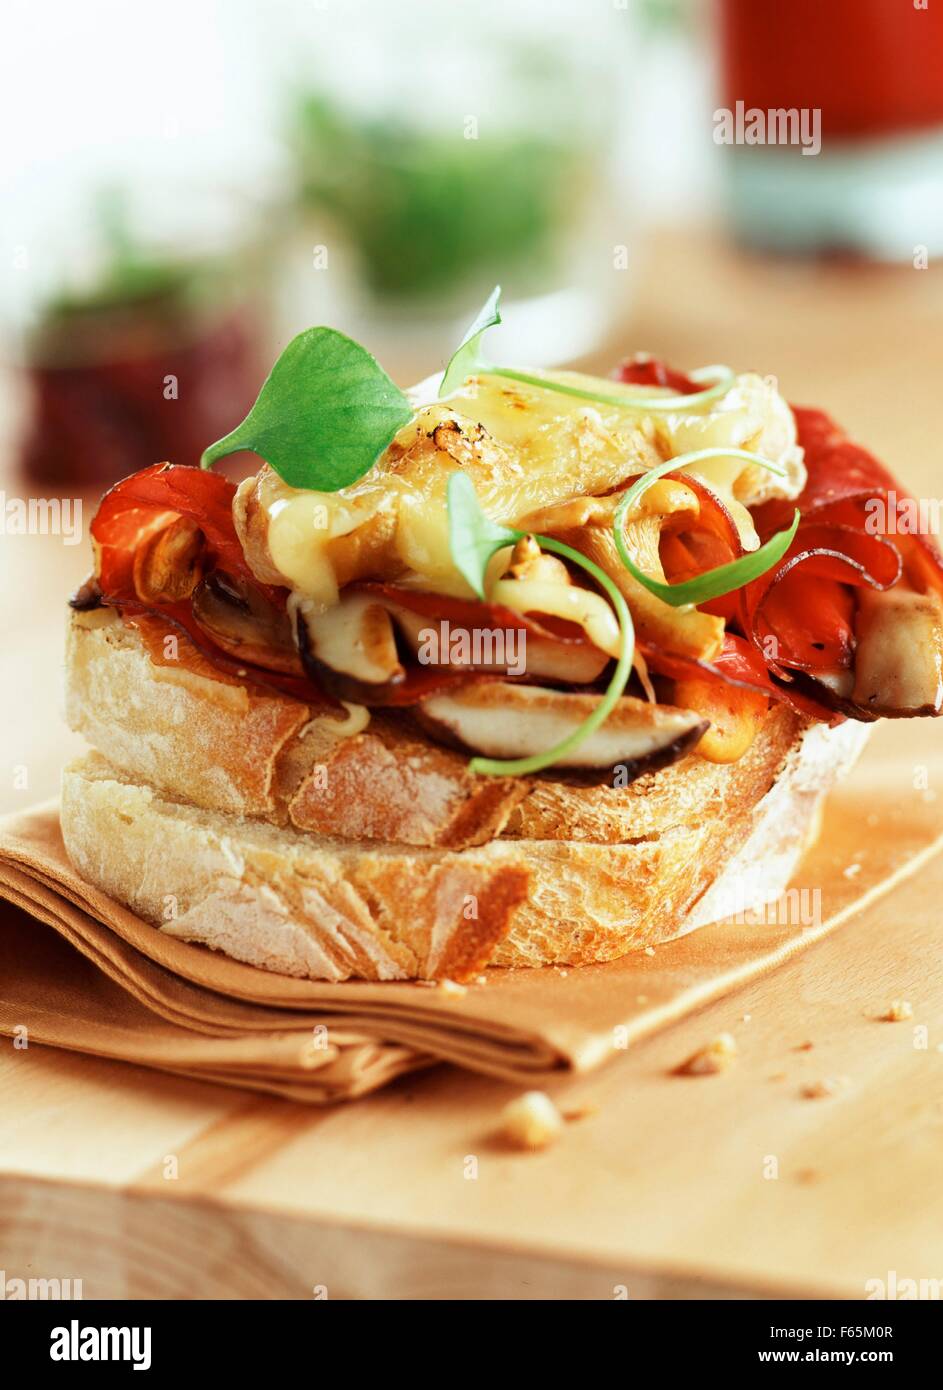 Rocamadour cheese and mushroom open sandwich Stock Photo